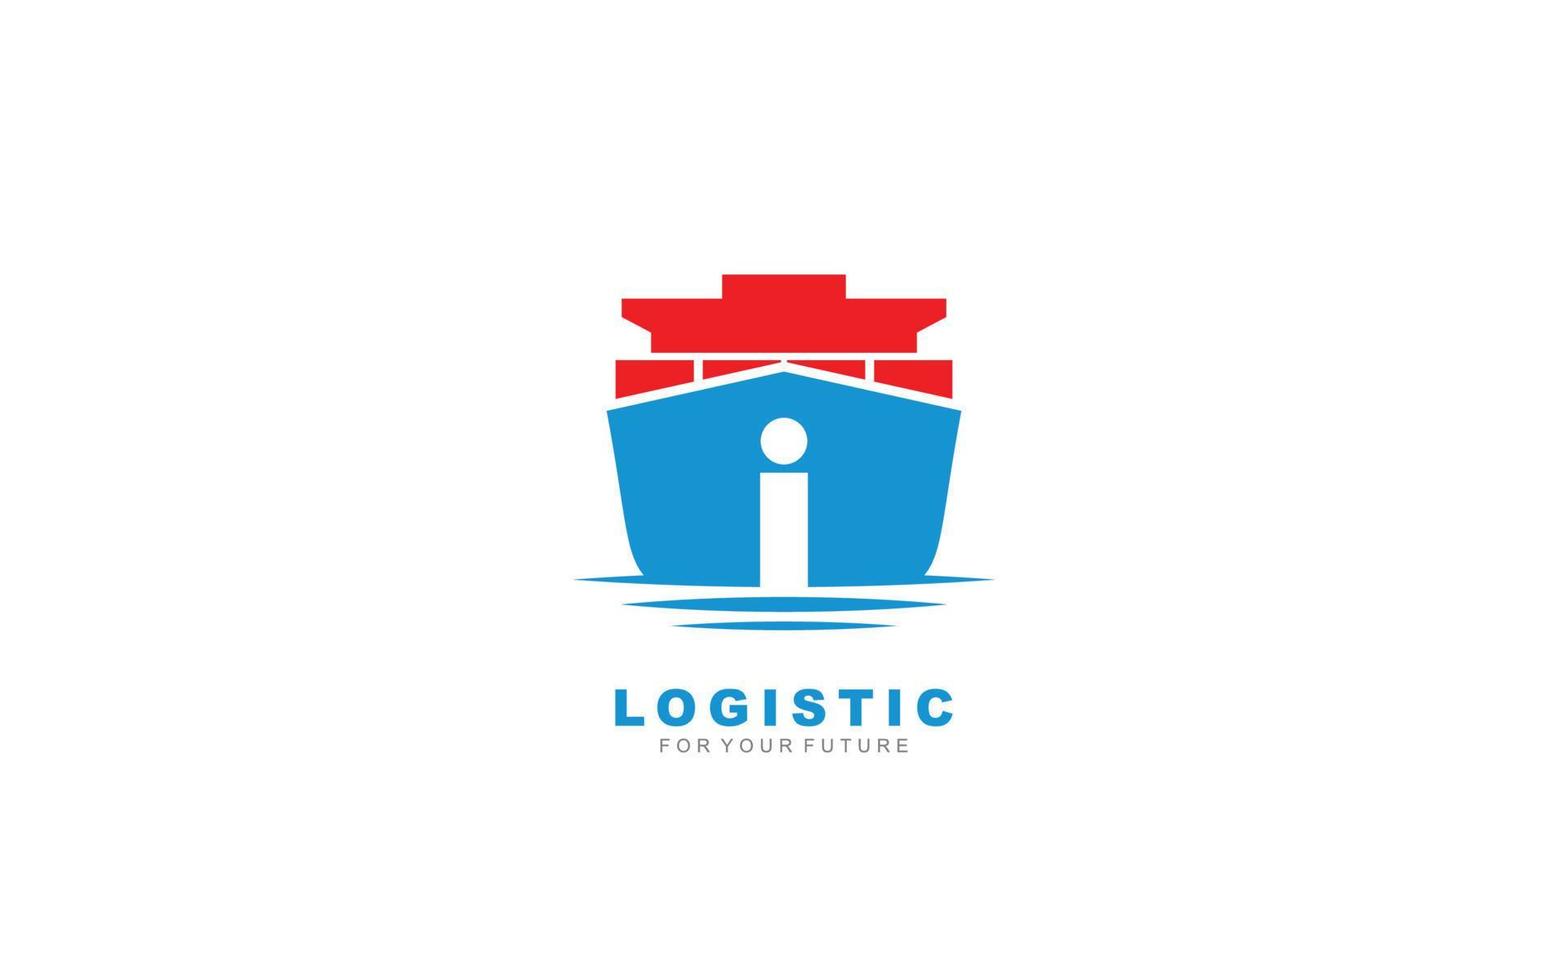 I logo logistic for branding company. shipping template vector illustration for your brand.